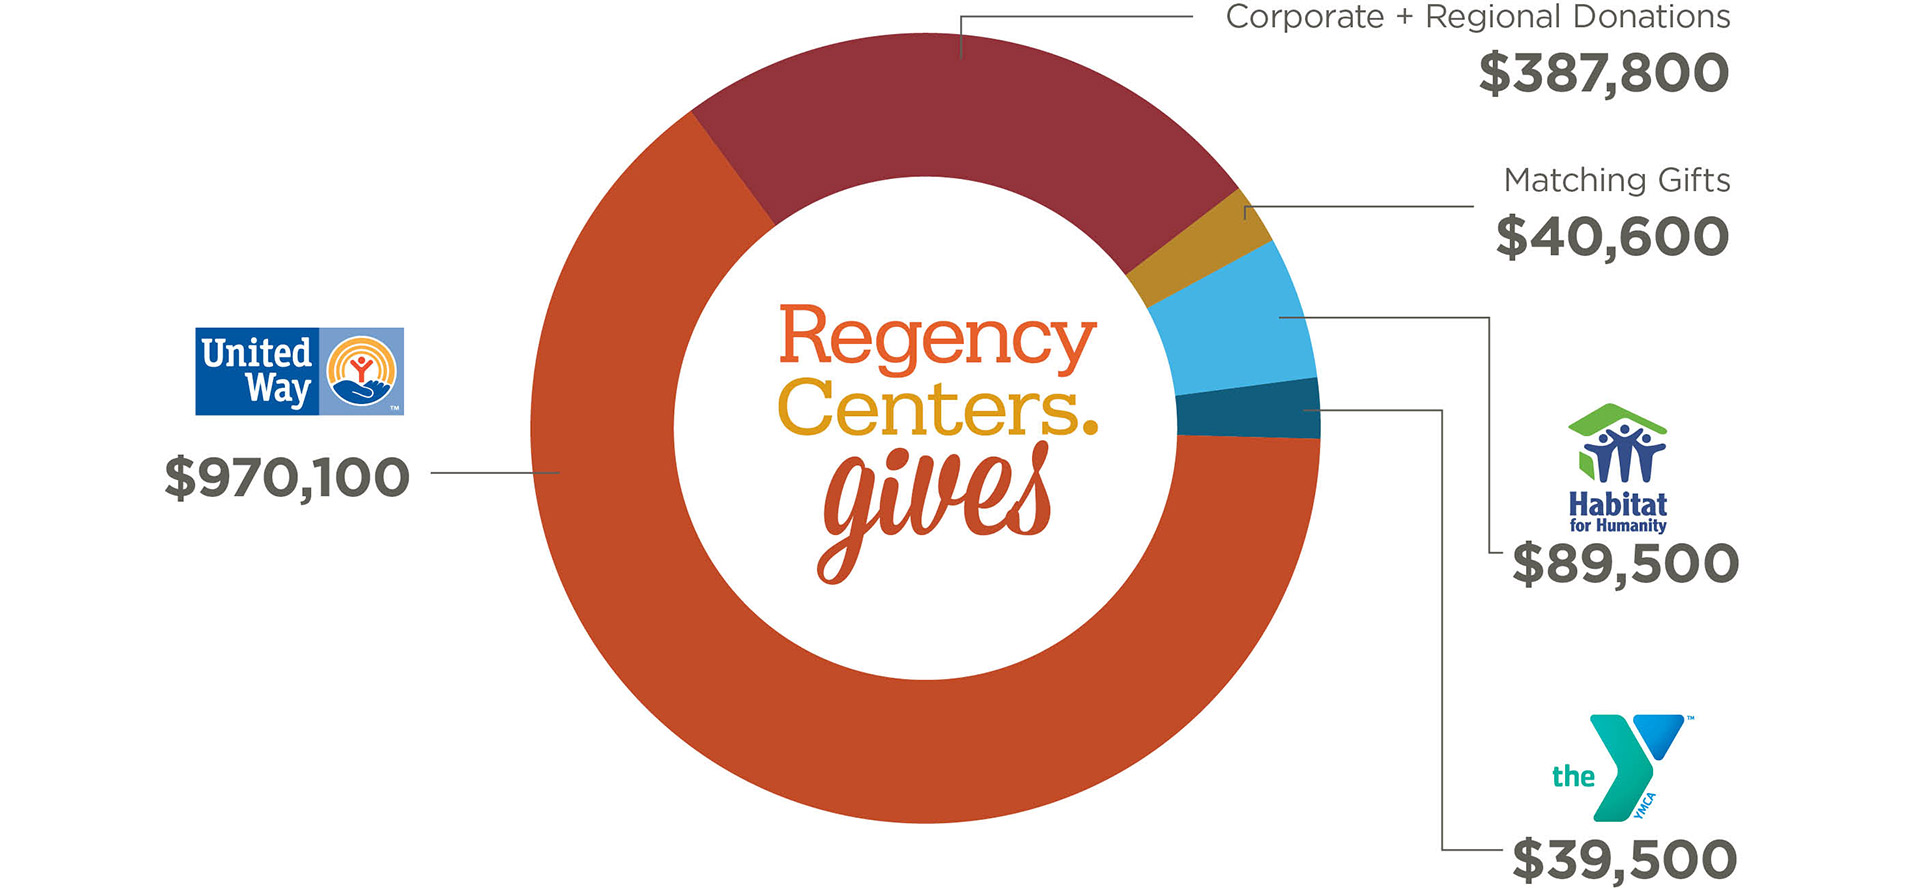 A pie chart showing Regency Donations: United Way $970,100; Habitat for Humanity: $89,500; YMCA: $39,500; Matching Gifts: $40,600; Corporate + Regional Donations: $387,800